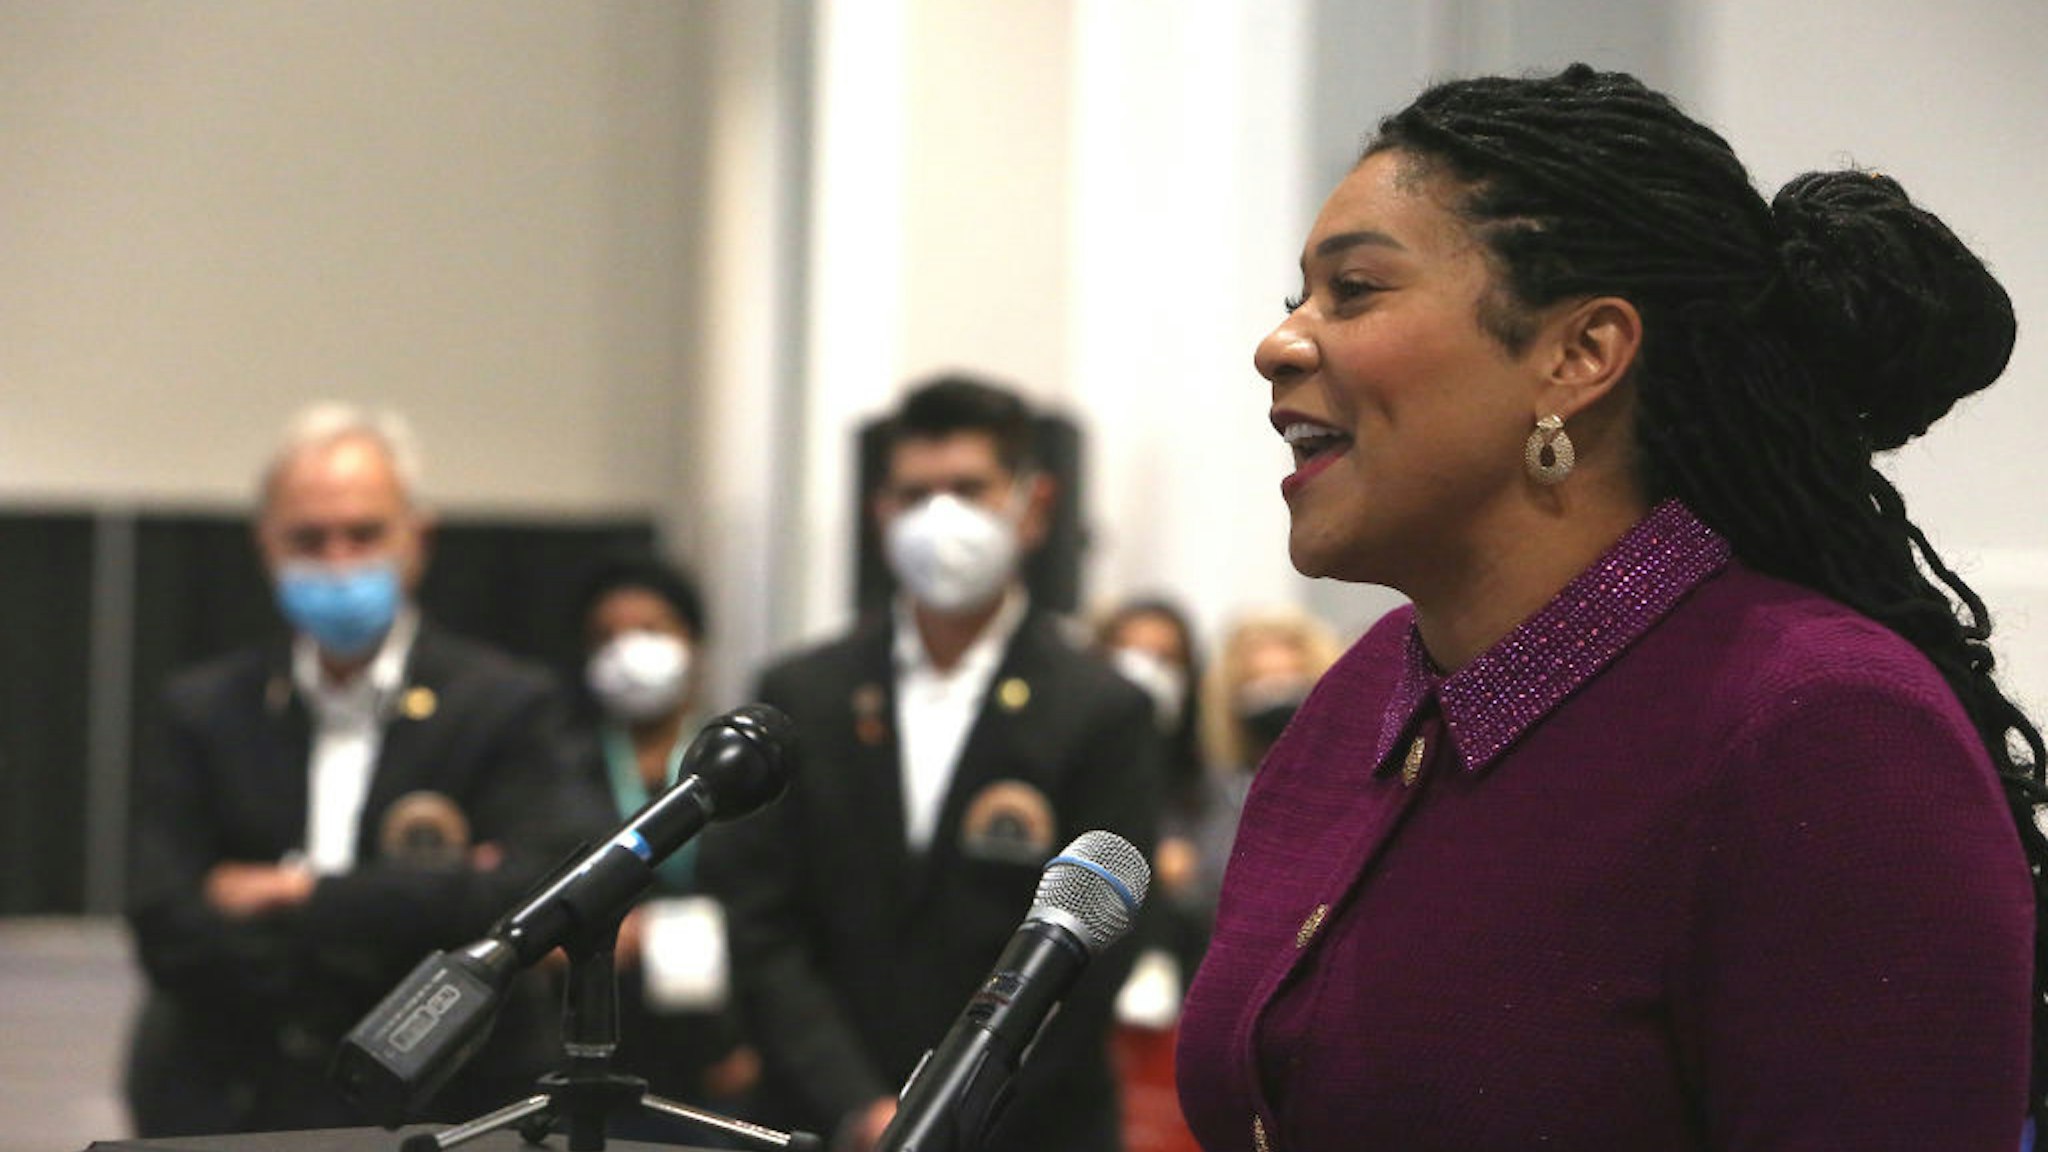 Mayor London Breed speaks to attendees at the start of the California Dental Association convention at Moscone South on Thursday, September 9, 2021 in San Francisco, Calif.